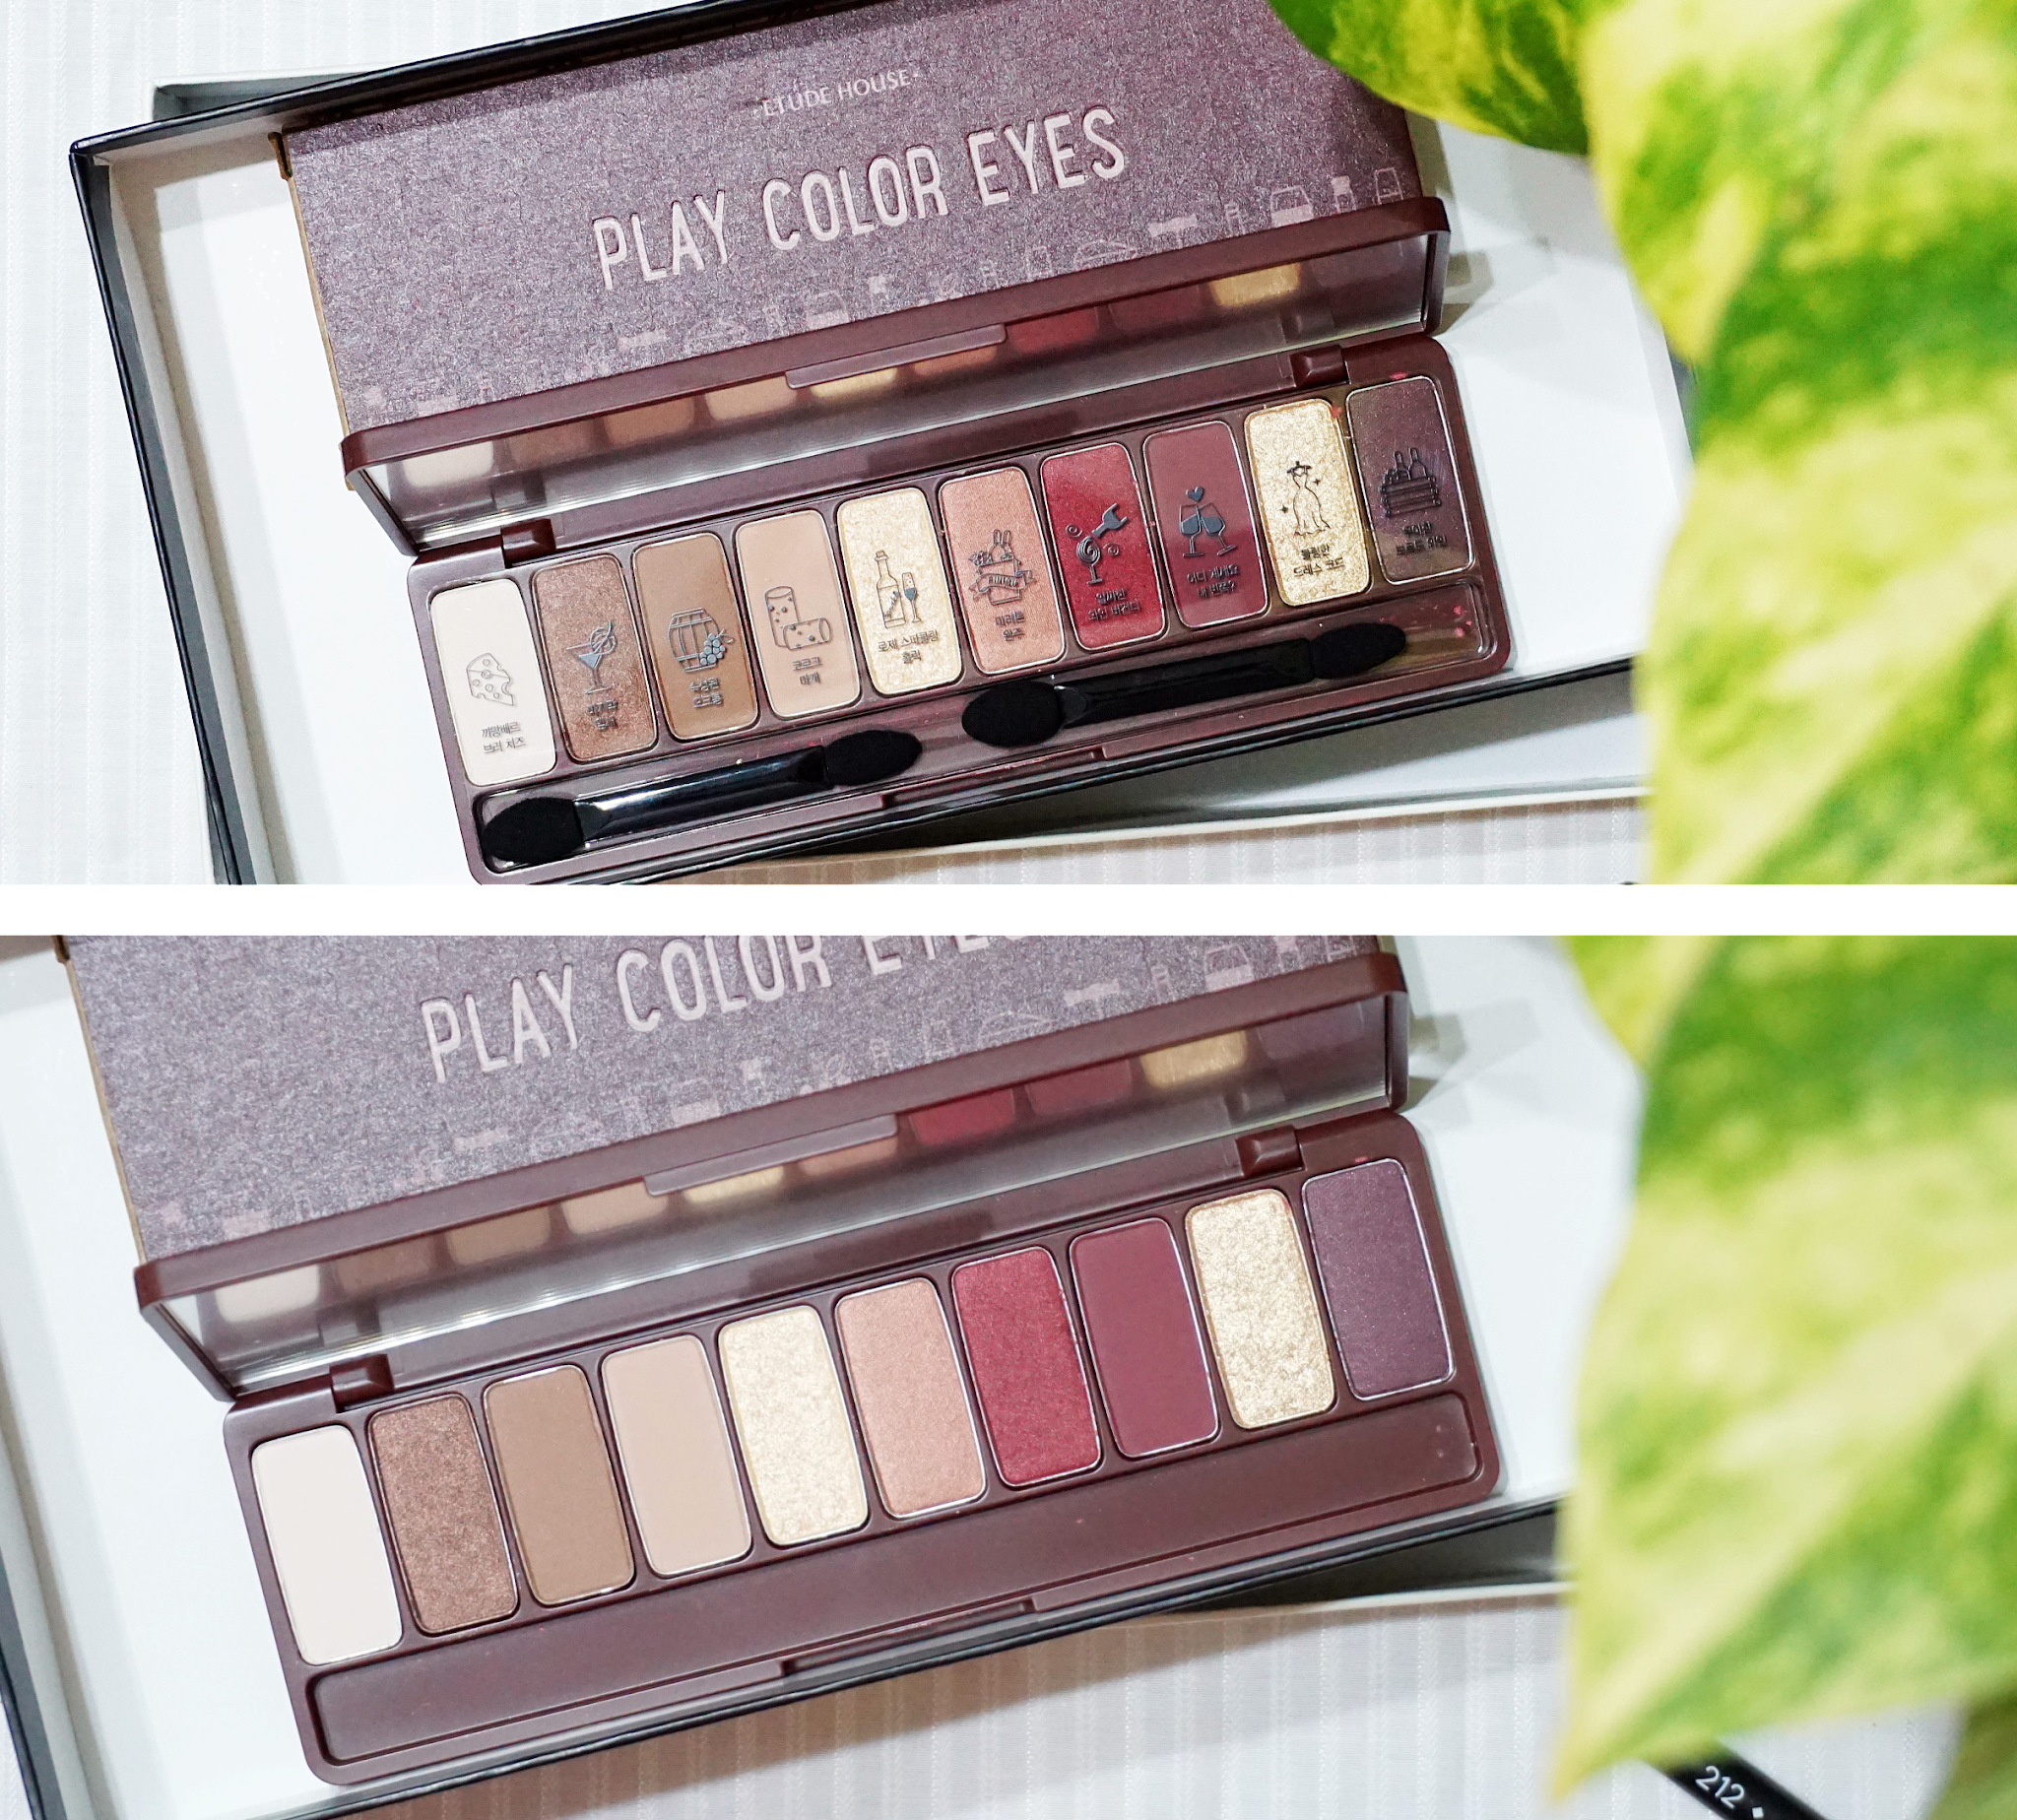 Swatch Etude House Play Color Eyes Wine Party Eyeshadow Palette